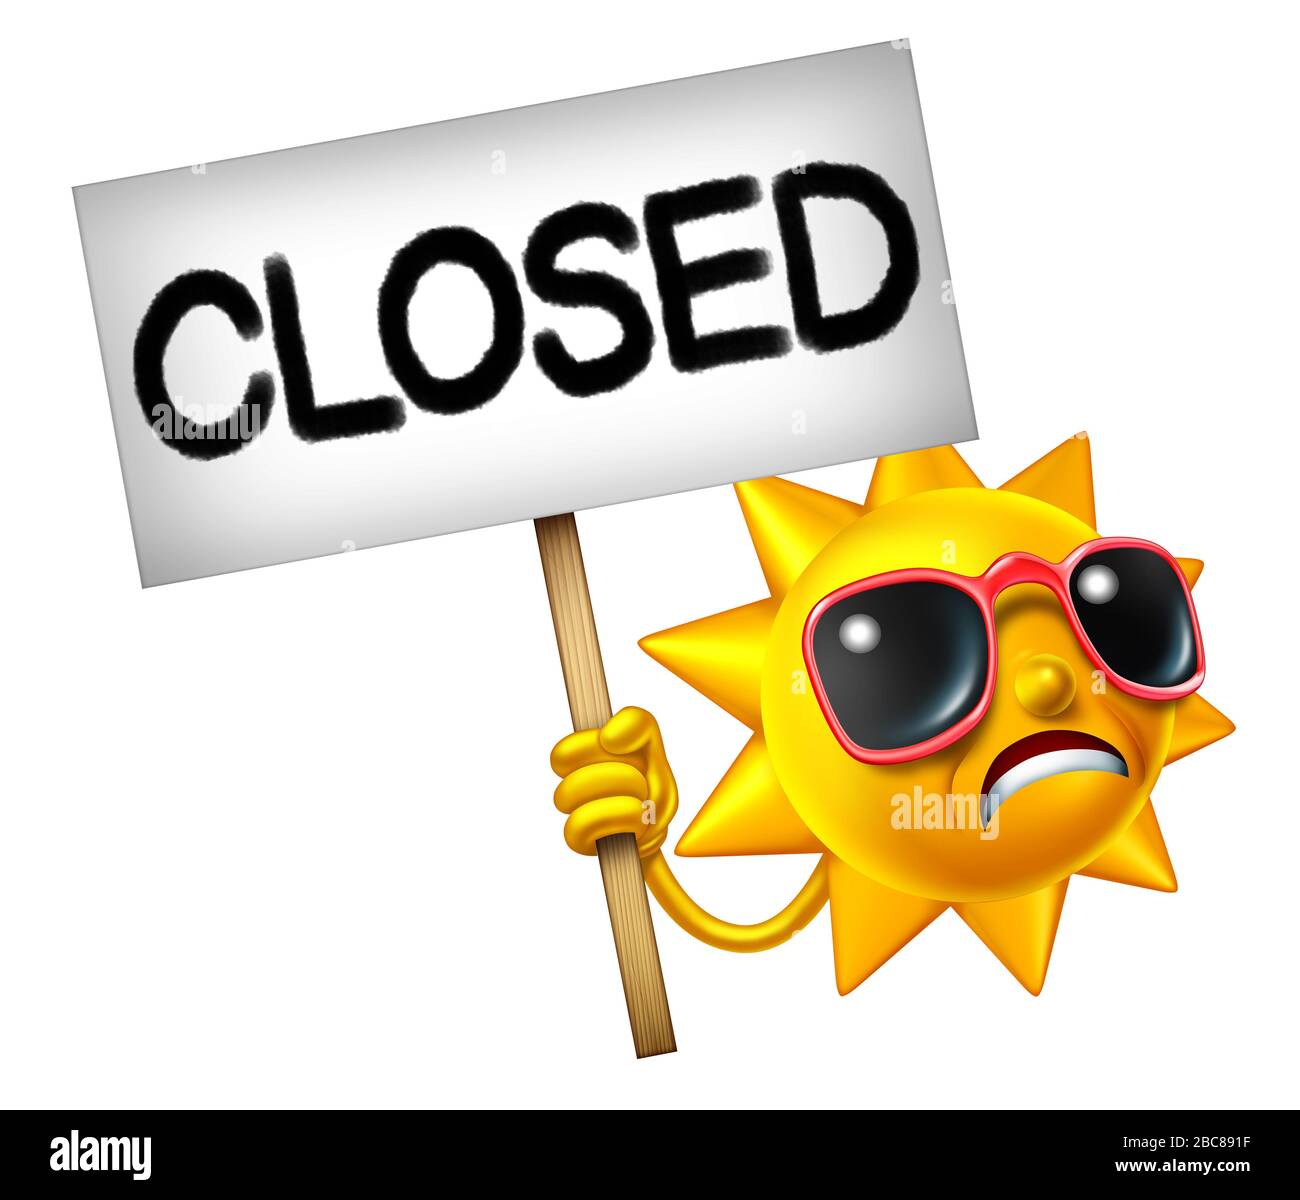 Closed Summer vacation and cancelled or canceled summertime activites symbol as a sad hot sun character holding a sign with painted text as a travel. Stock Photo